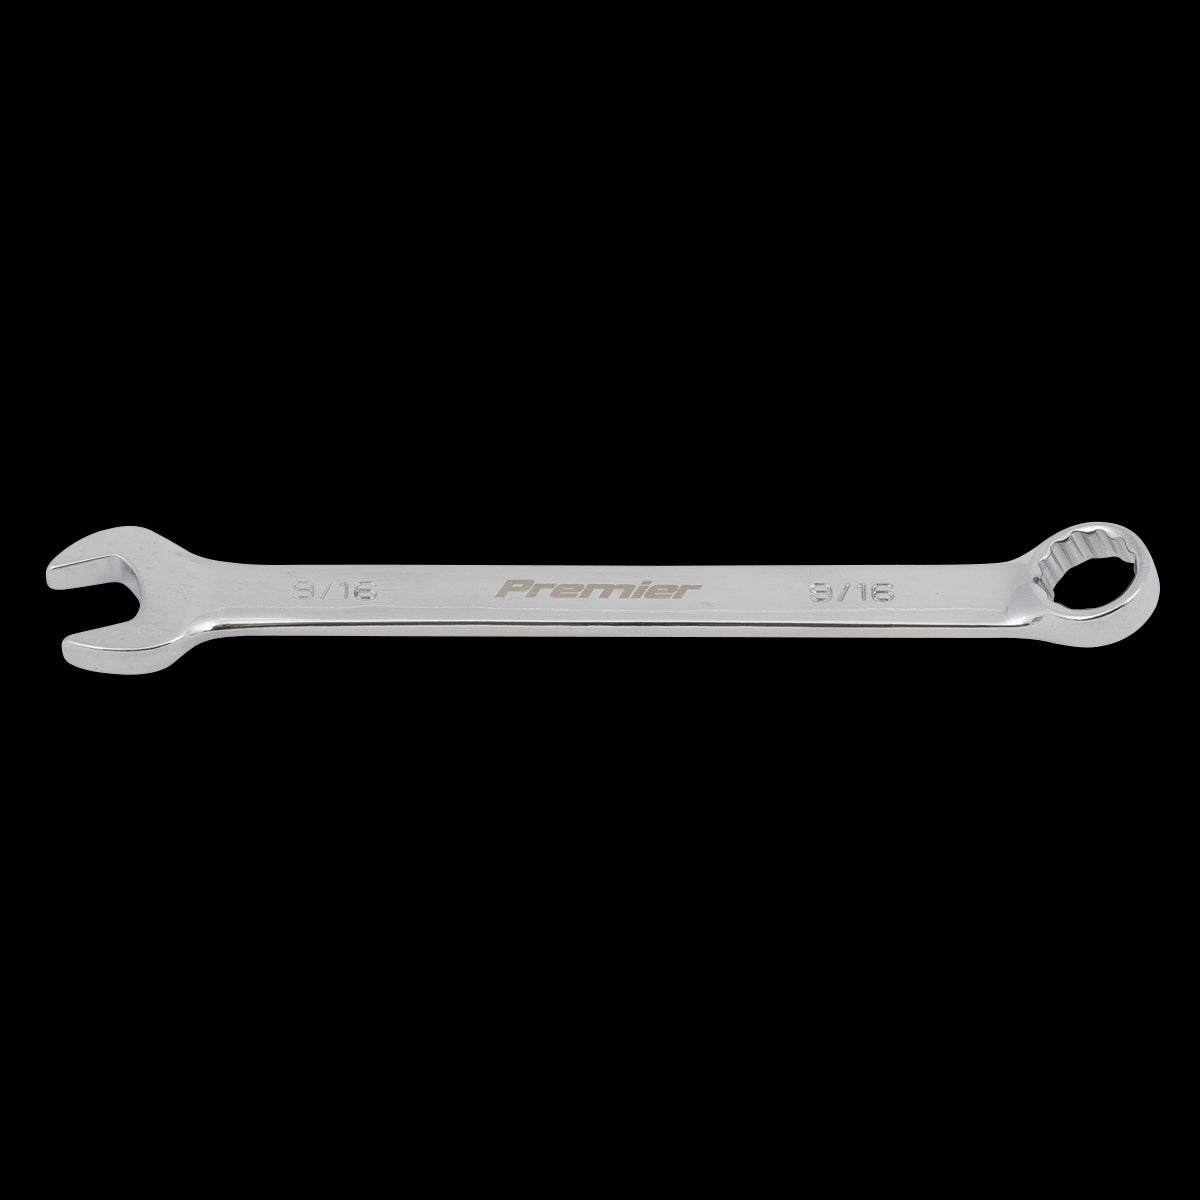 Sealey Premier Combination Spanner  9/16" - Imperial